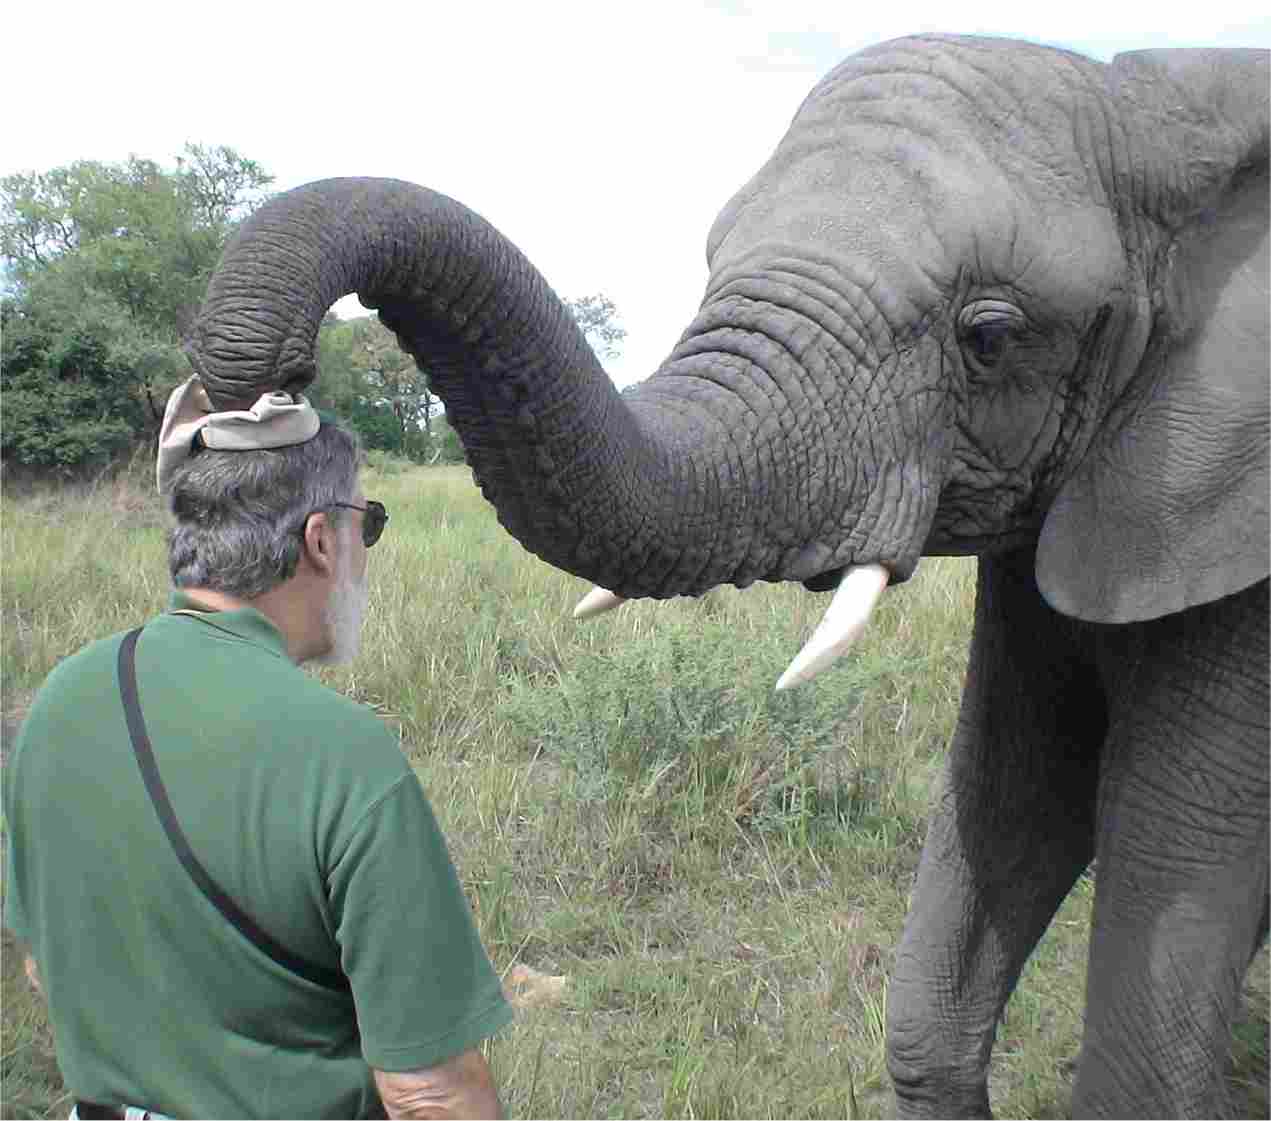 One of the elephants was taught to pluck a hat right off of your head and place it on its own head!  Photo by FG.